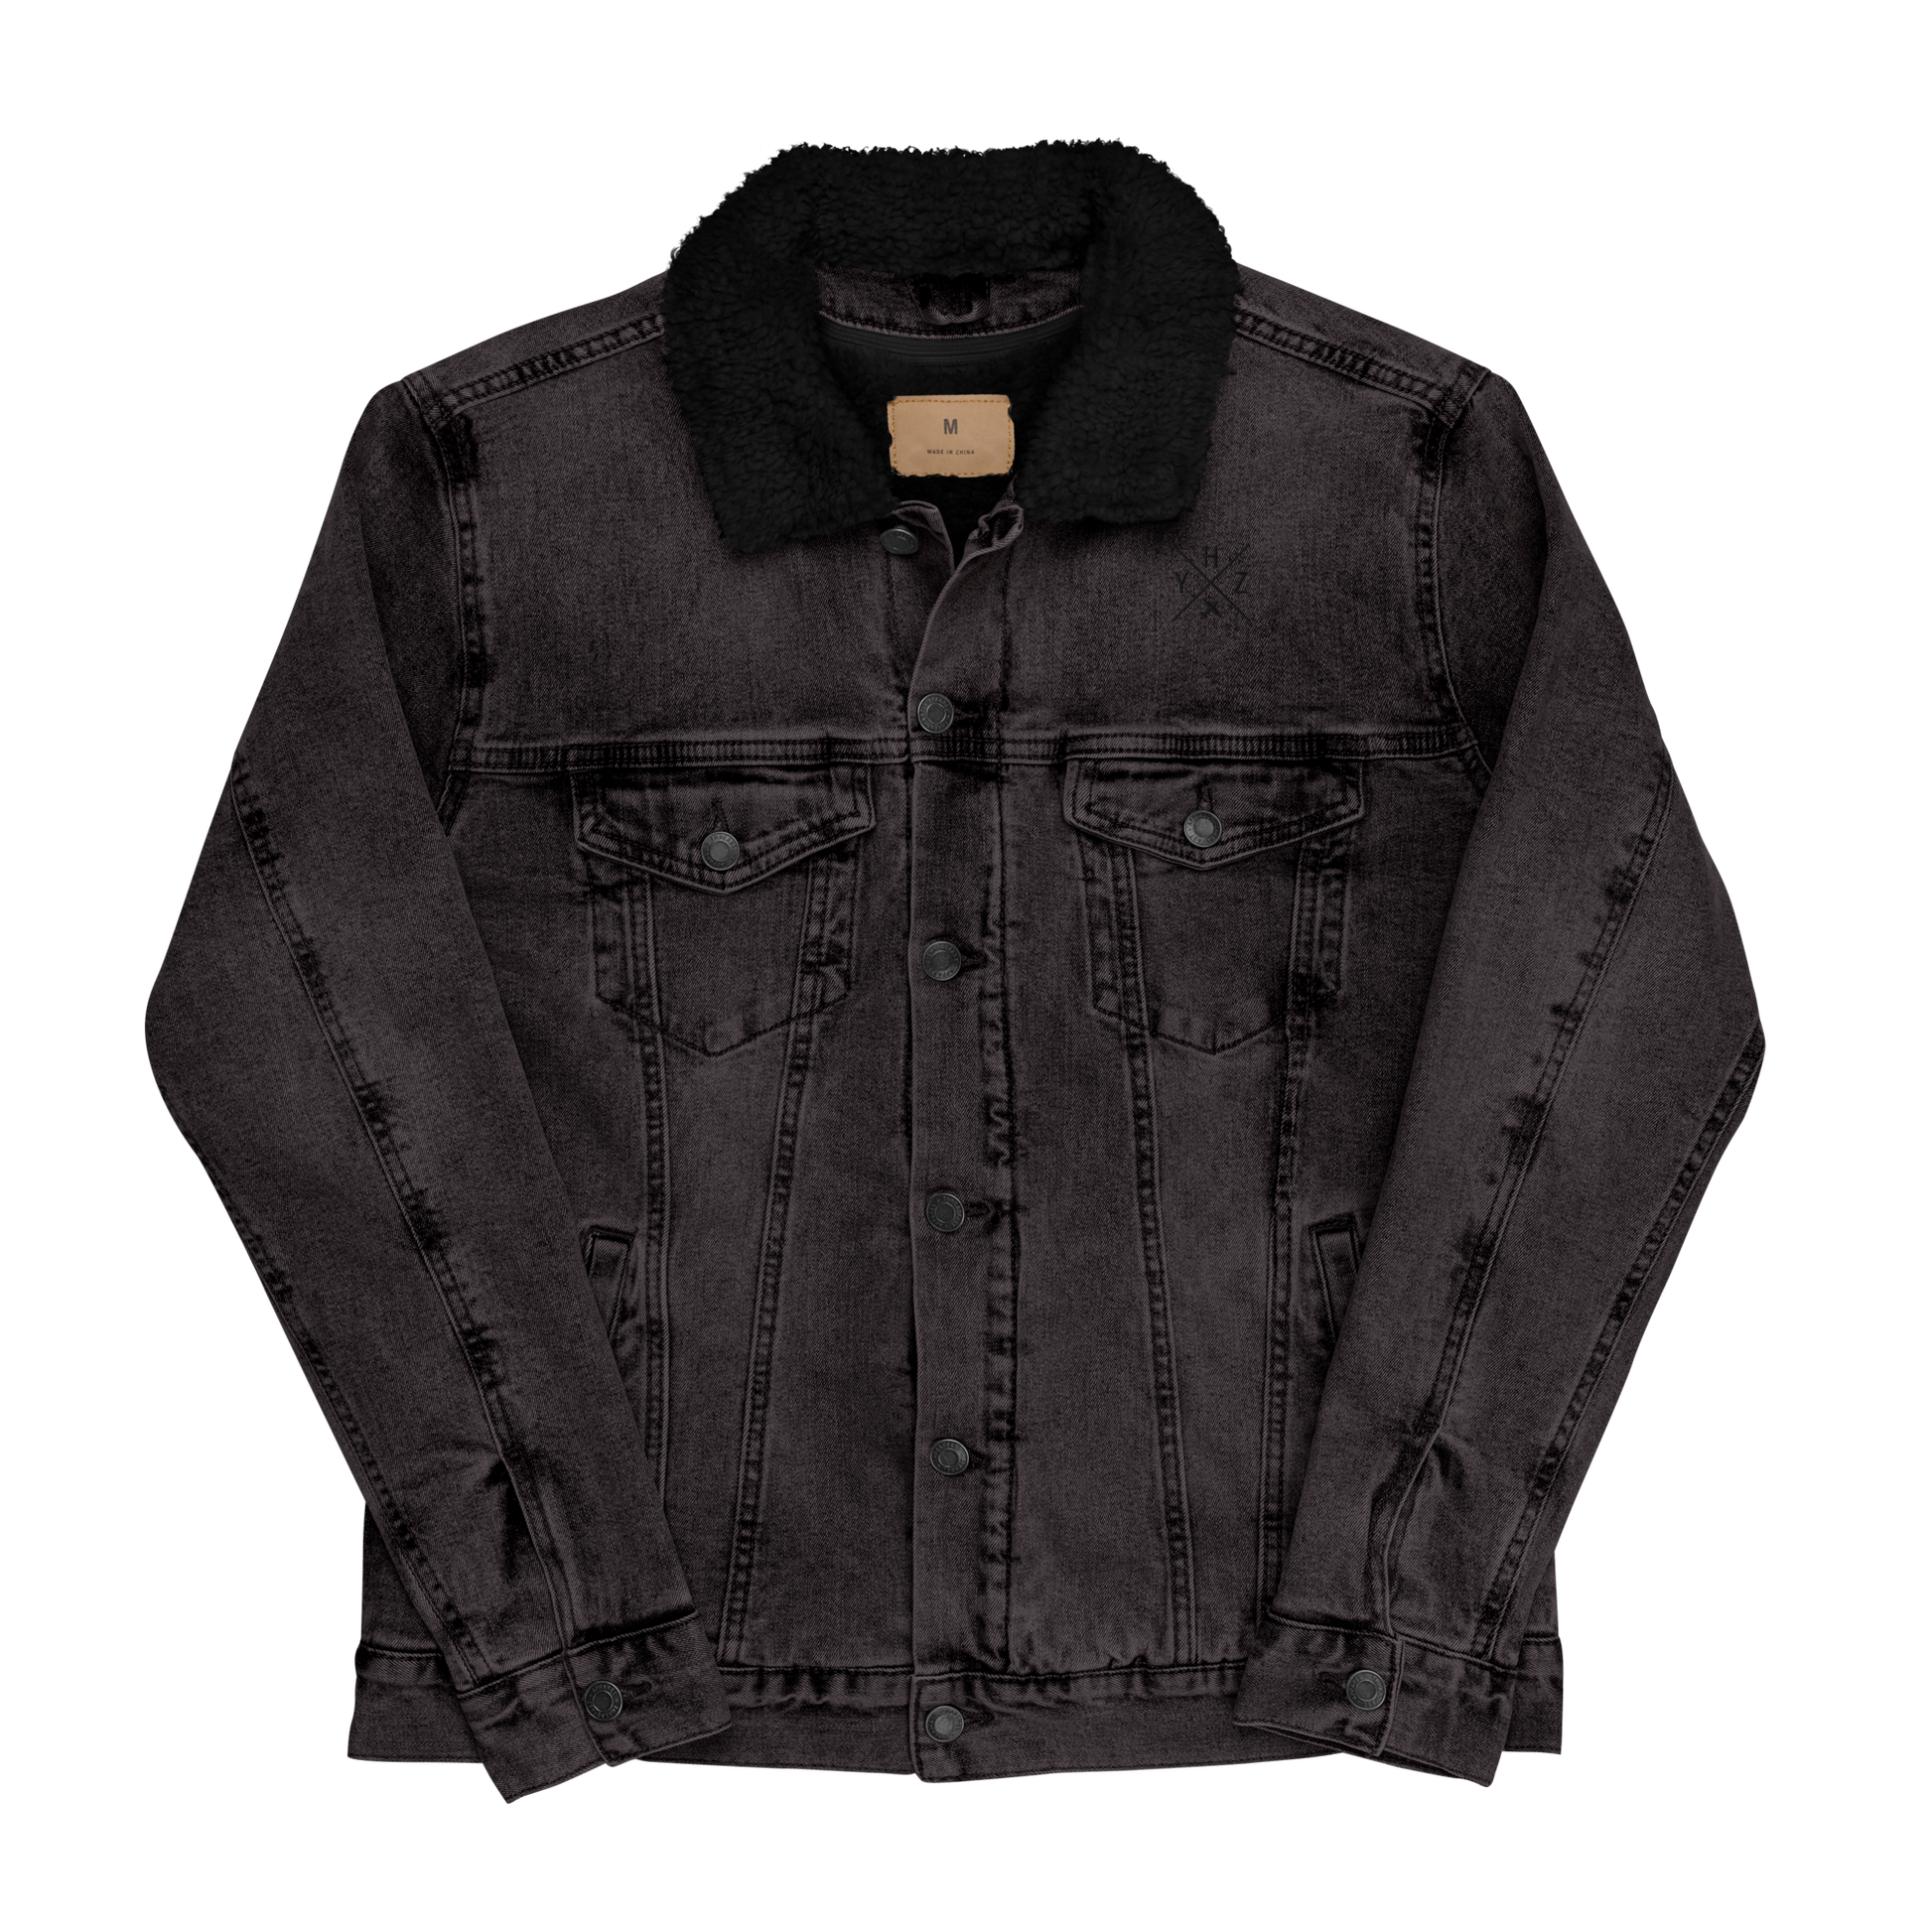 YHM Designs - YHZ Halifax Denim Sherpa Jacket - Crossed-X Design with Airport Code and Vintage Propliner - Black & White Embroidery - Image 02